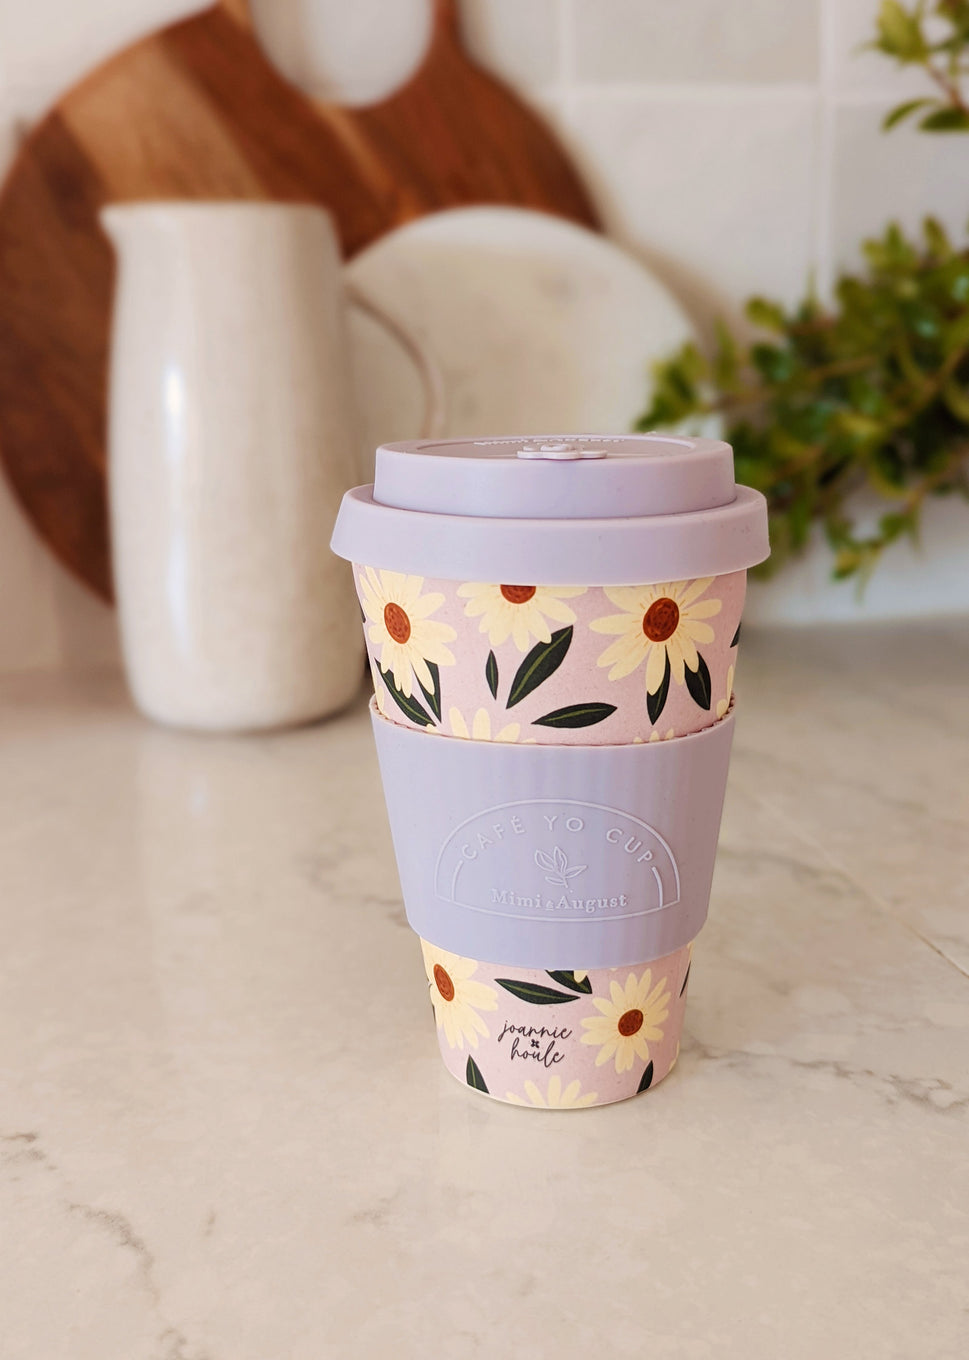 new reuser coffee cup by IDC is UK's first made from vegetable oil